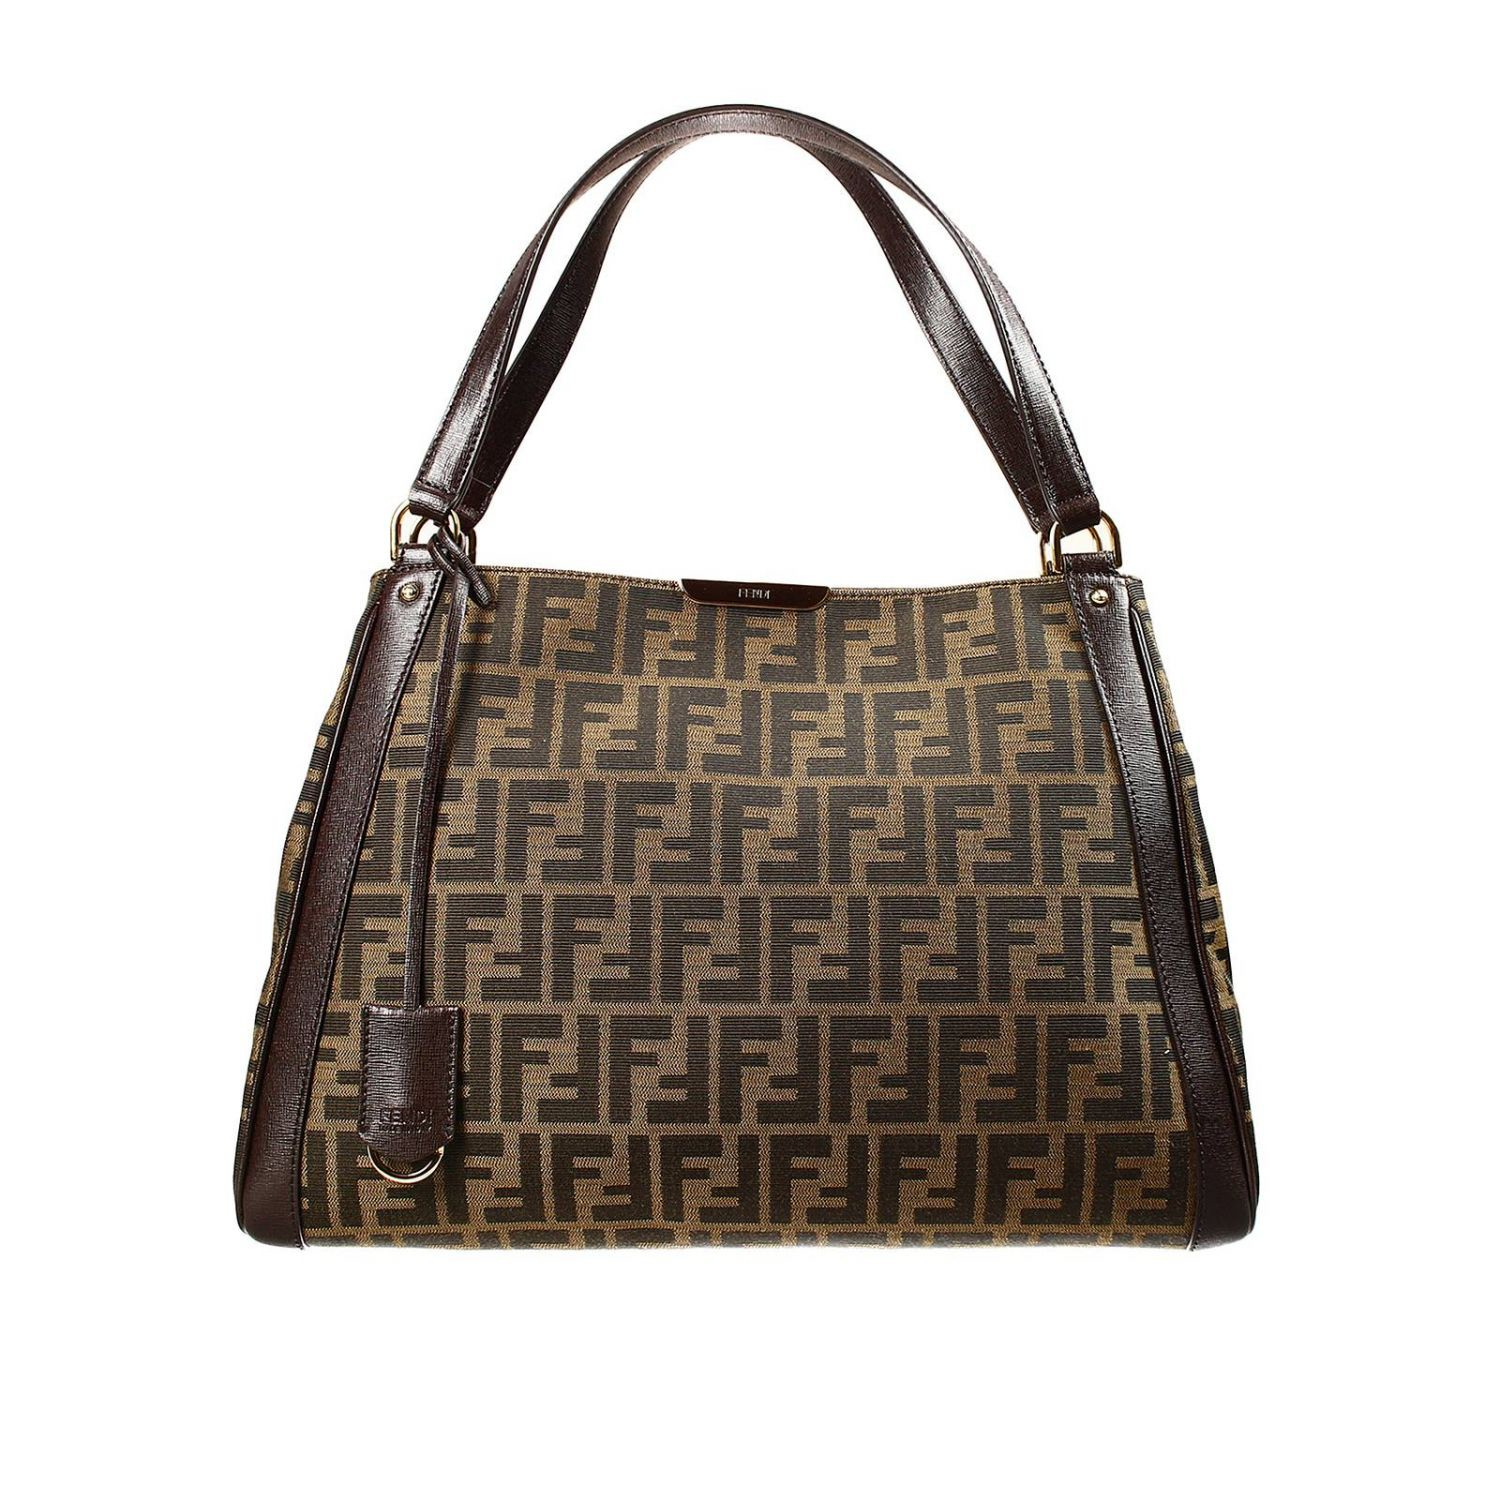 Fendi Handbag Zucca Shopping Bag With Contrast in Brown | Lyst